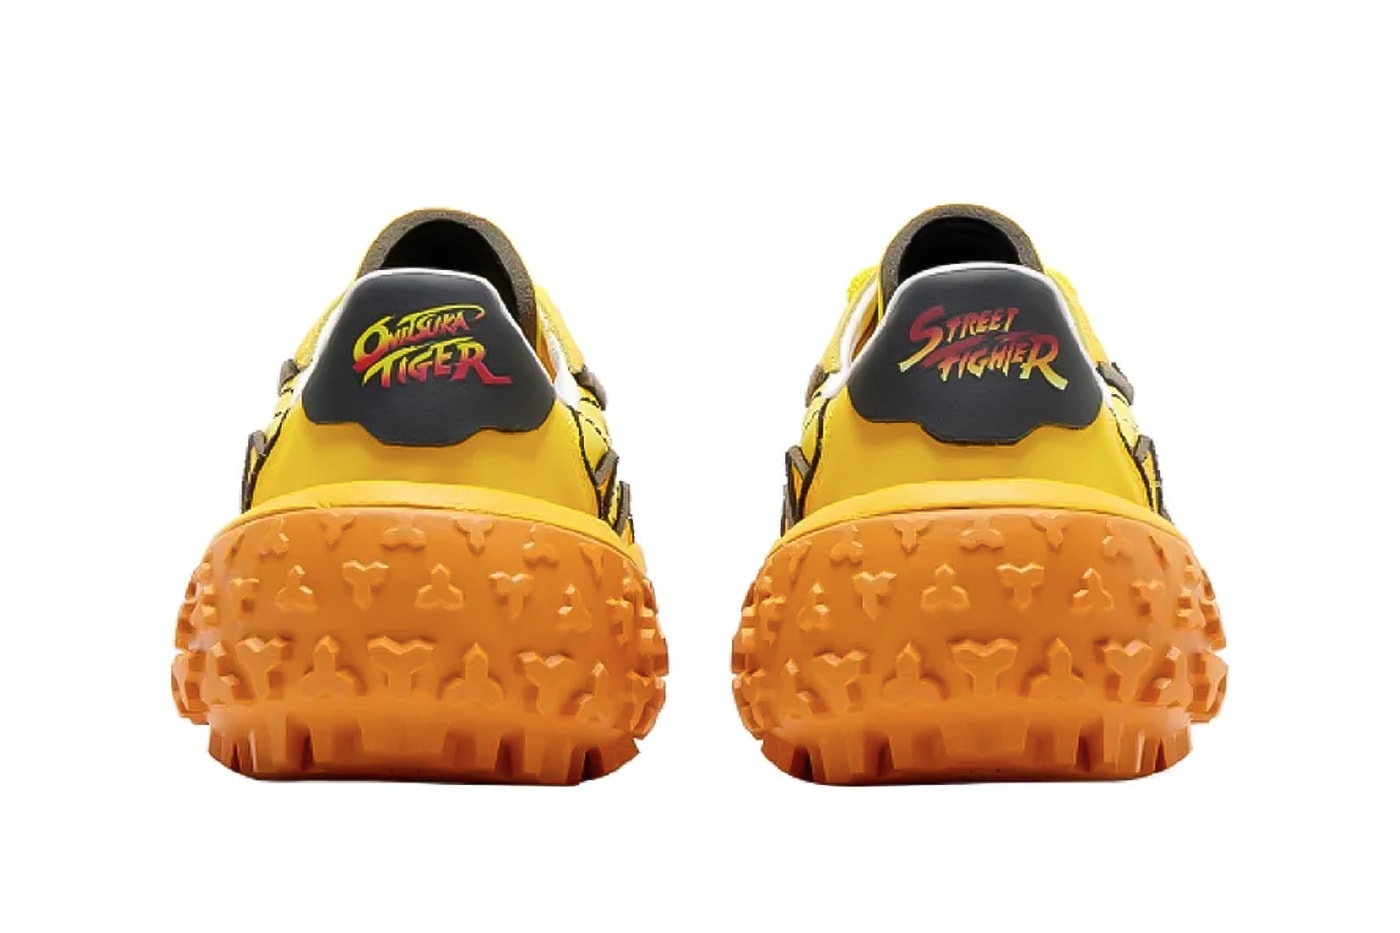 Onitsuka Tiger x Street Fighter 6 customized ot items avatar endactus release info date price